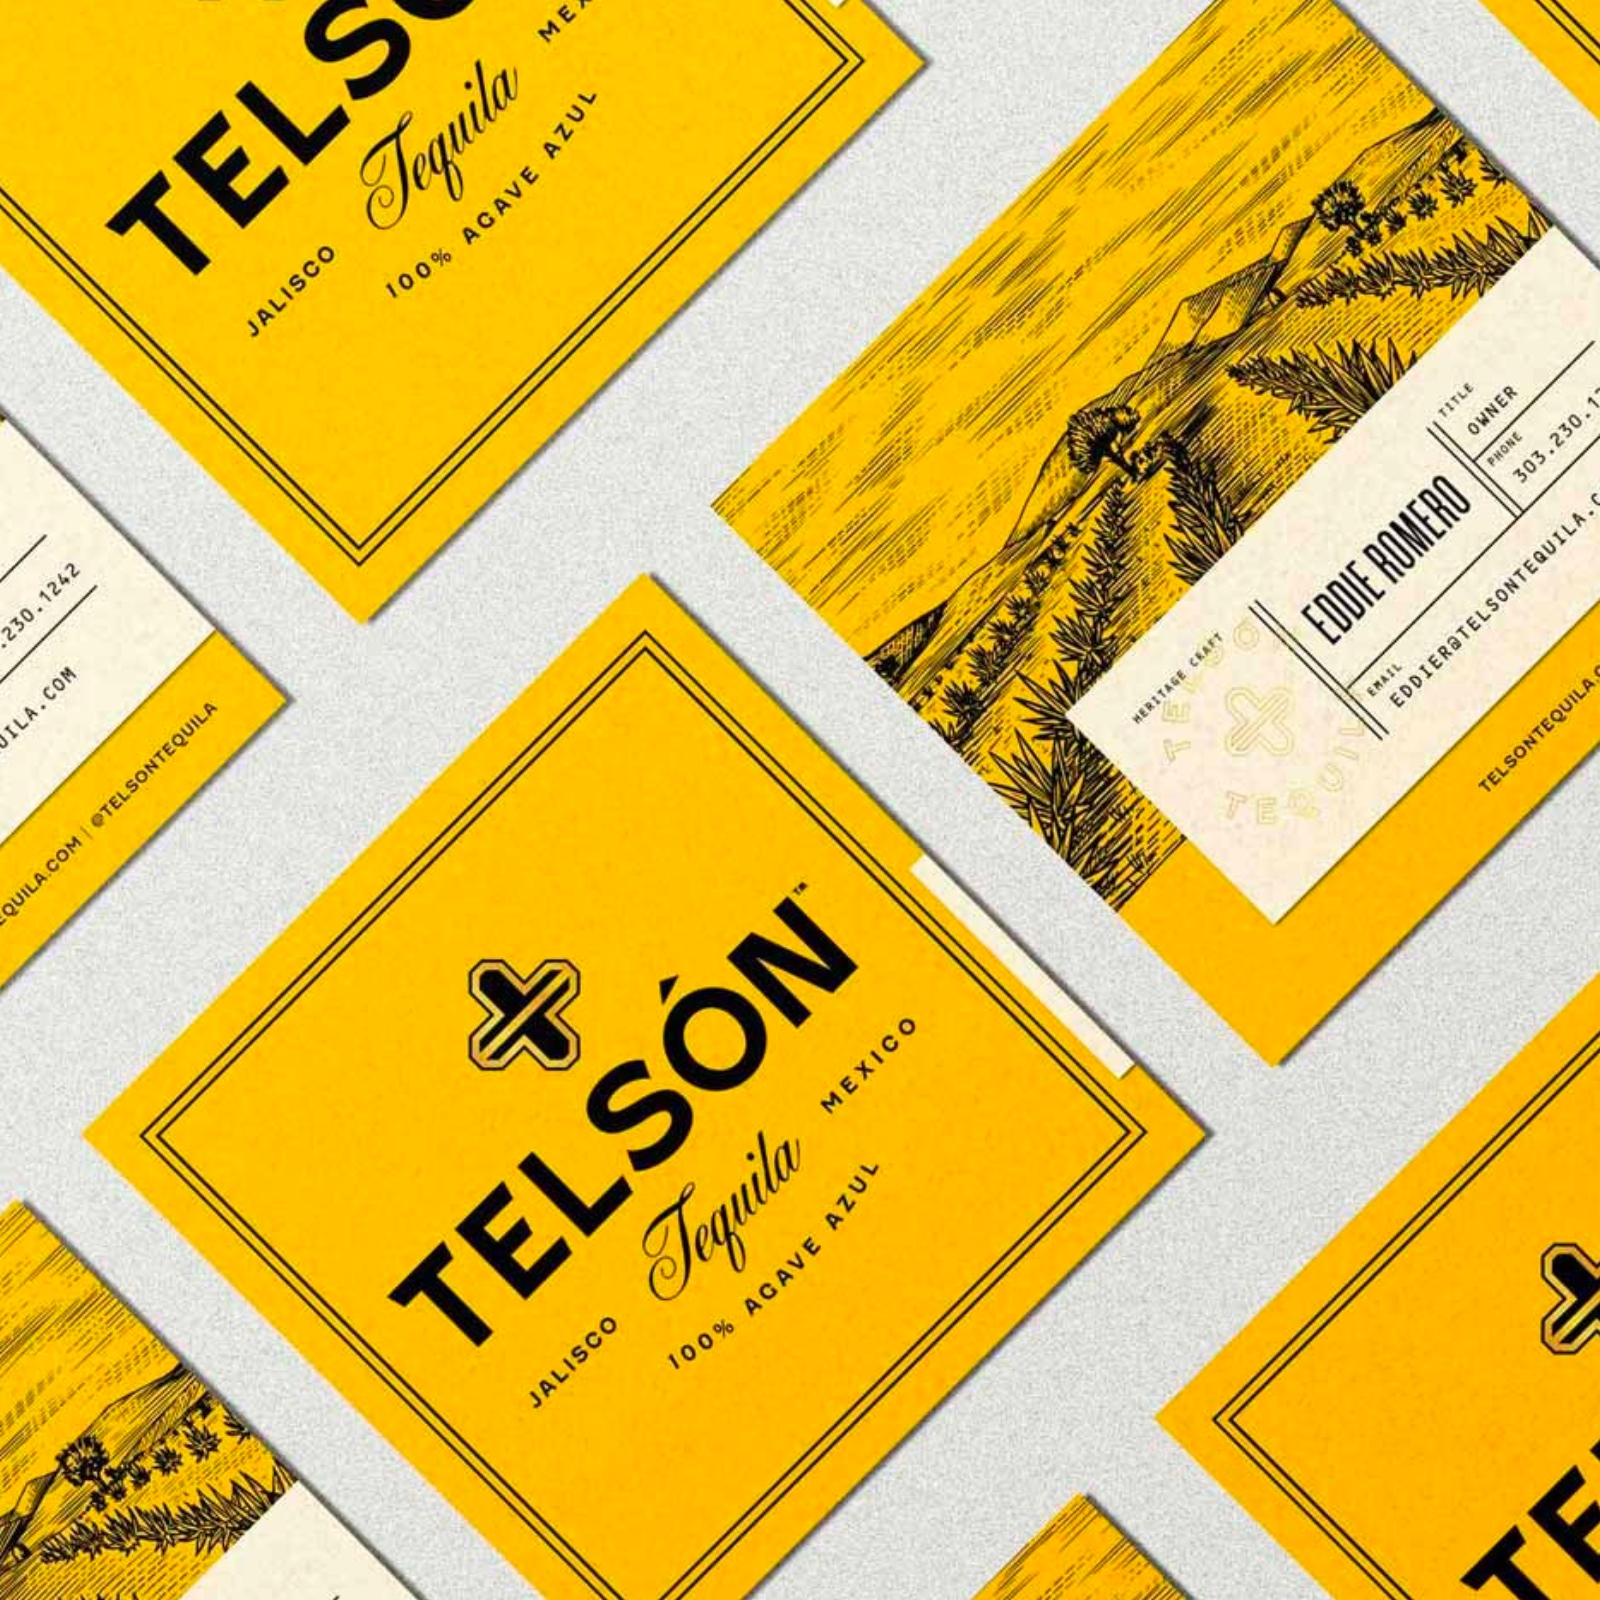 Telsn Tequila a bold tequila brand with aspirational swagger